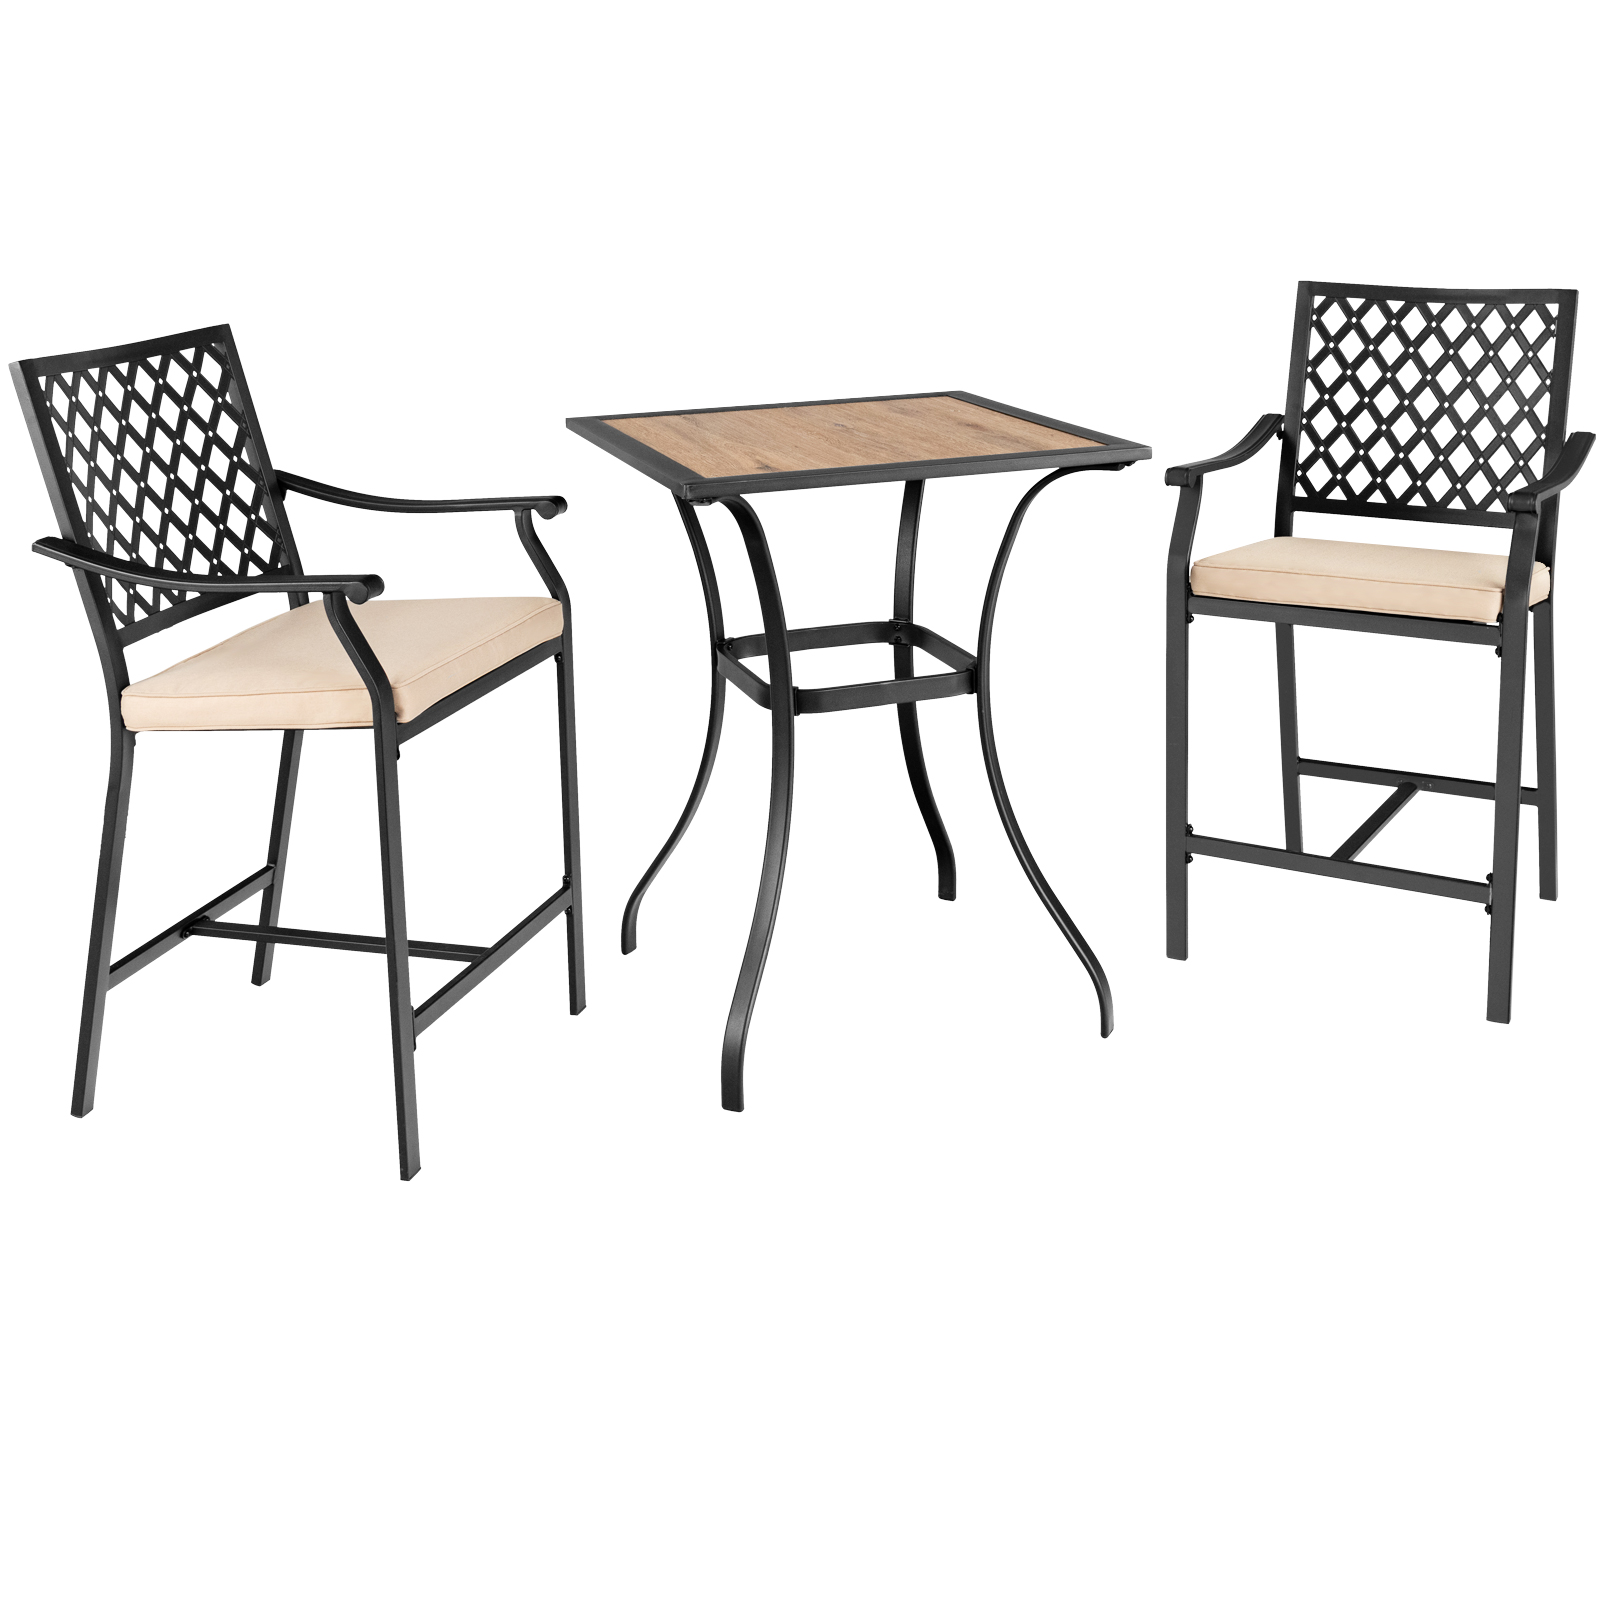 3_Pieces_Patio_Bar_Set_with_High_Density_Seat_Cushions-3.jpg